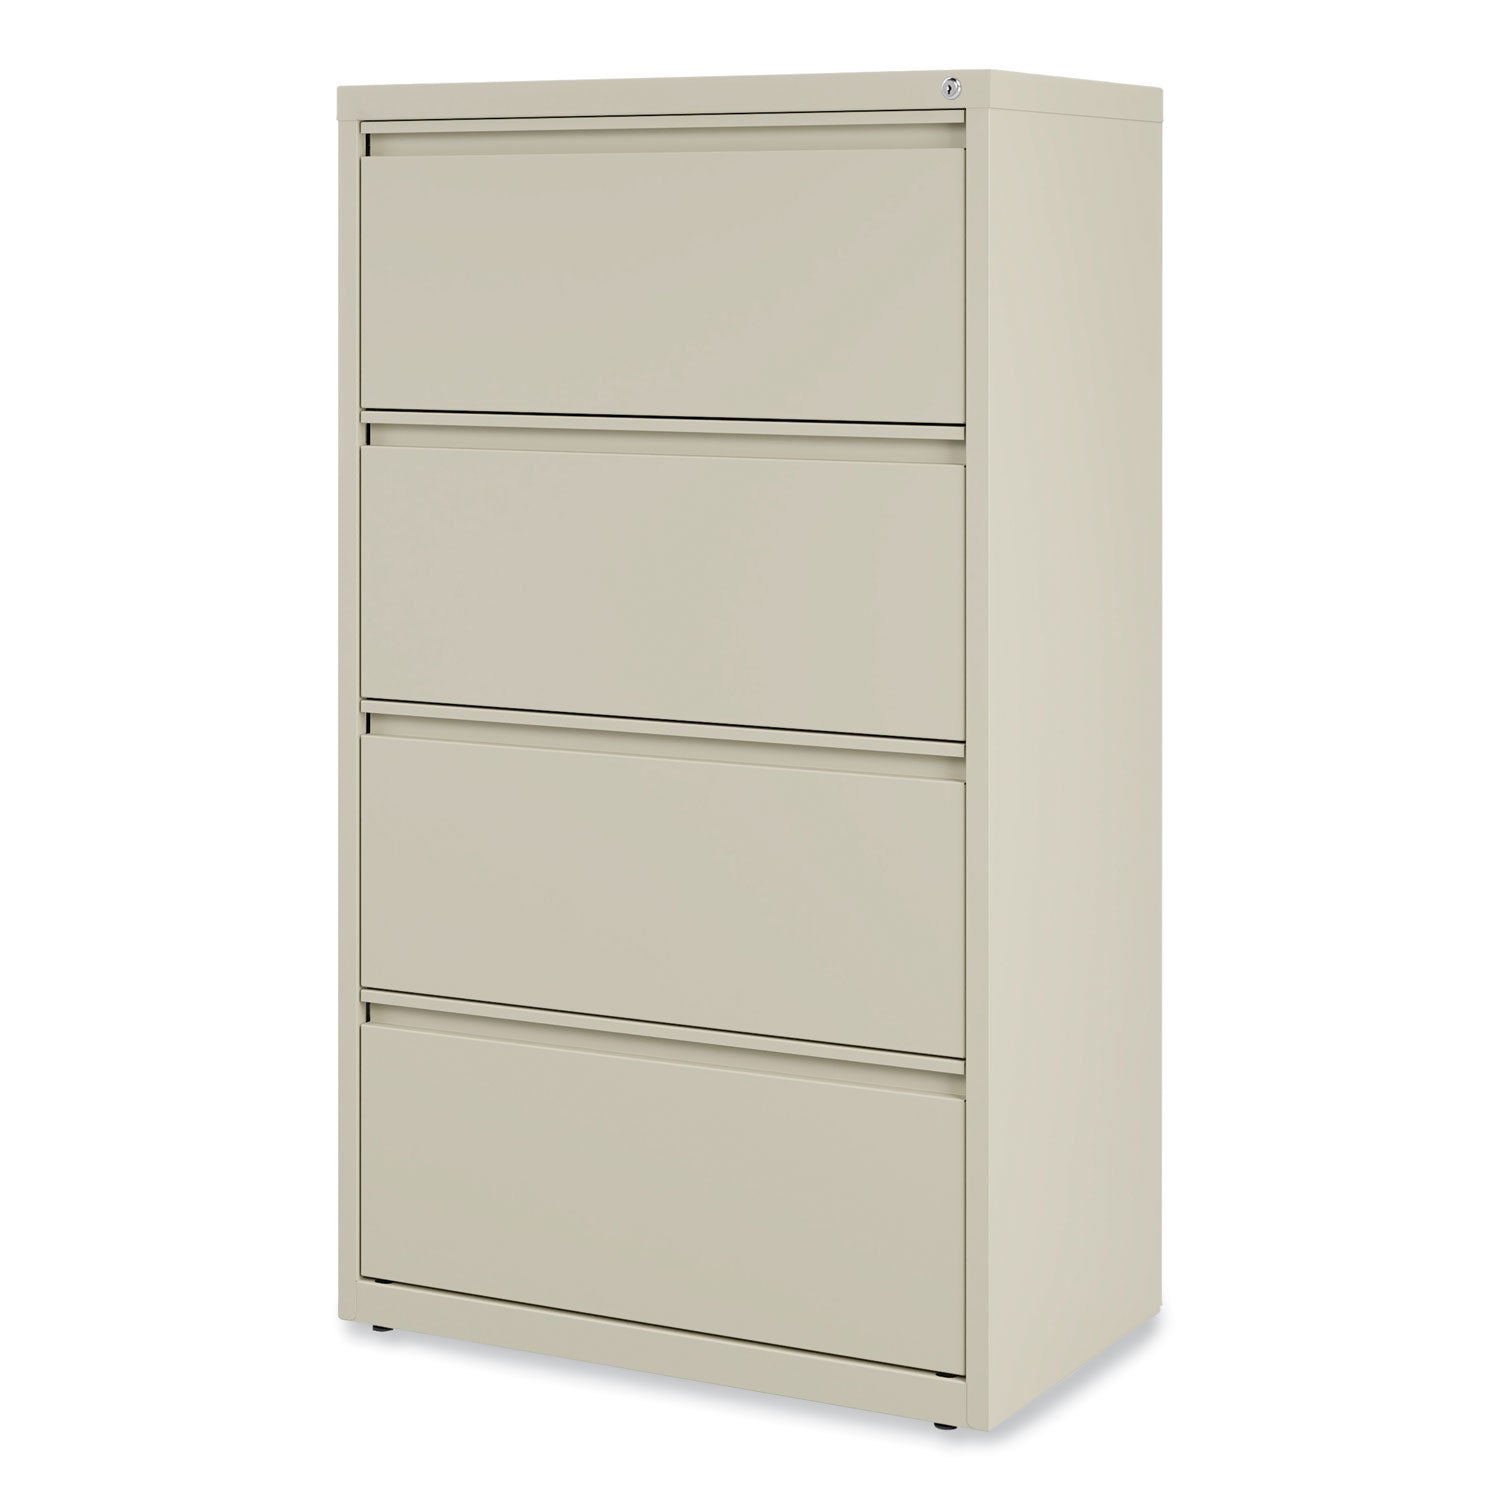 lateral-file-4-legal-letter-size-file-drawers-putty-30-x-1863-x-525_alehlf3054py - 5